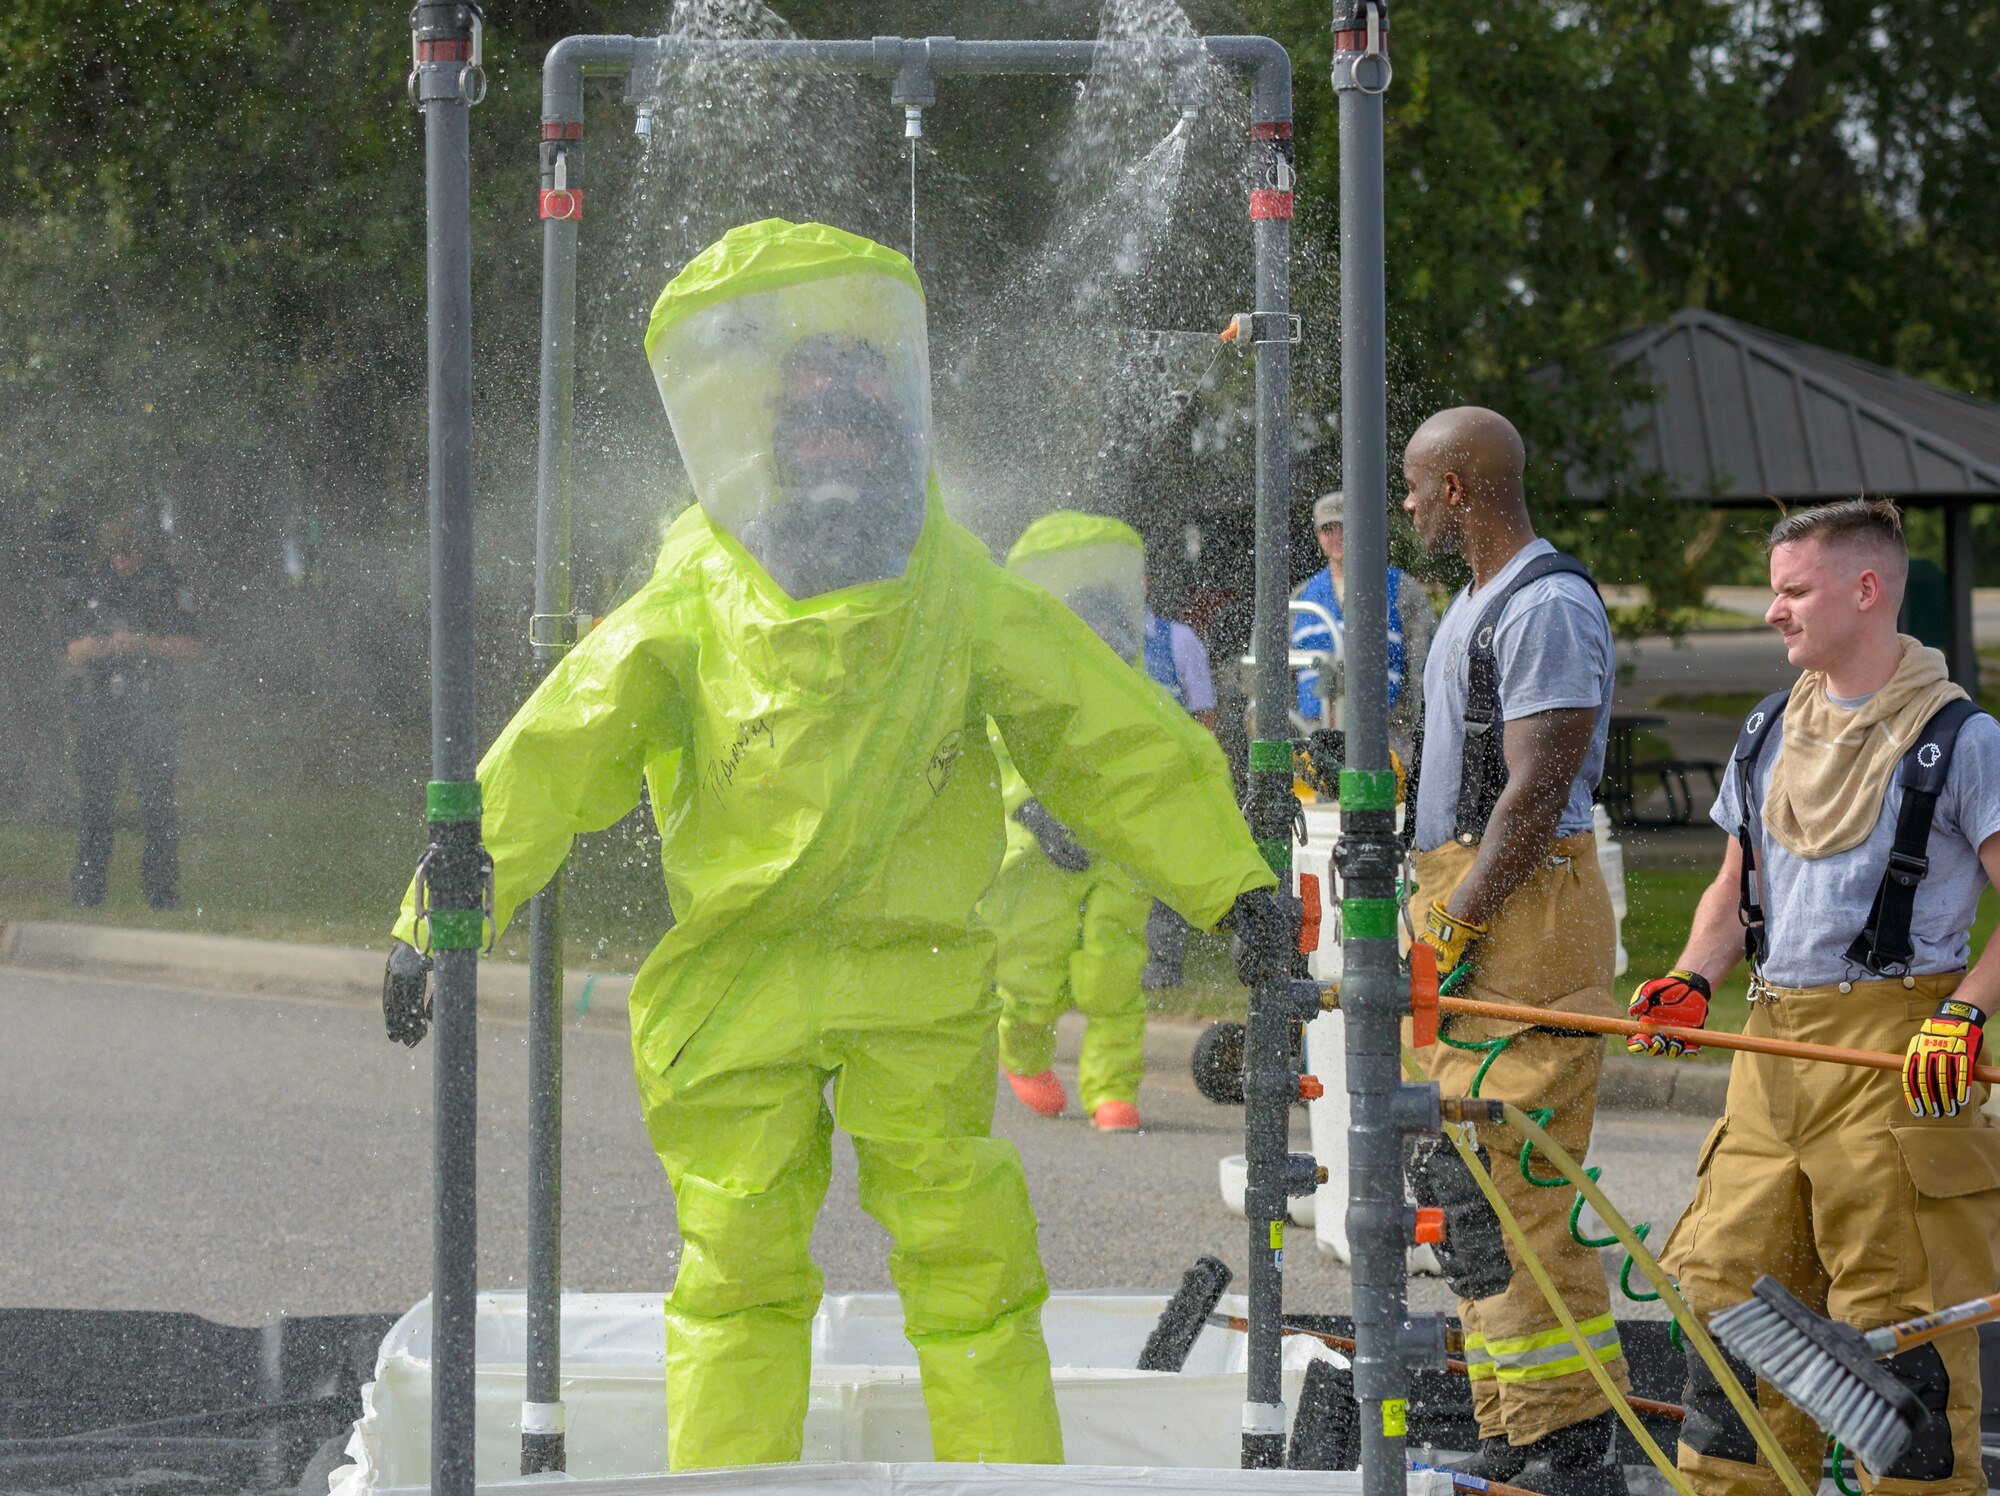 Keesler firefighters go through the decontamination site during the Anti-Terrorism, Force Protection Condition and Chemical, Biological, Radiological, Nuclear and high-yield Explosives training exercise at the Marina on Keesler Air Force Base, Mississippi, Oct. 17, 2018. The AT/FPCON/CBRNE exercise was conducted to evaluate the mission readiness and security of Keesler. (U.S. Air Force photo by Andre' Askew)